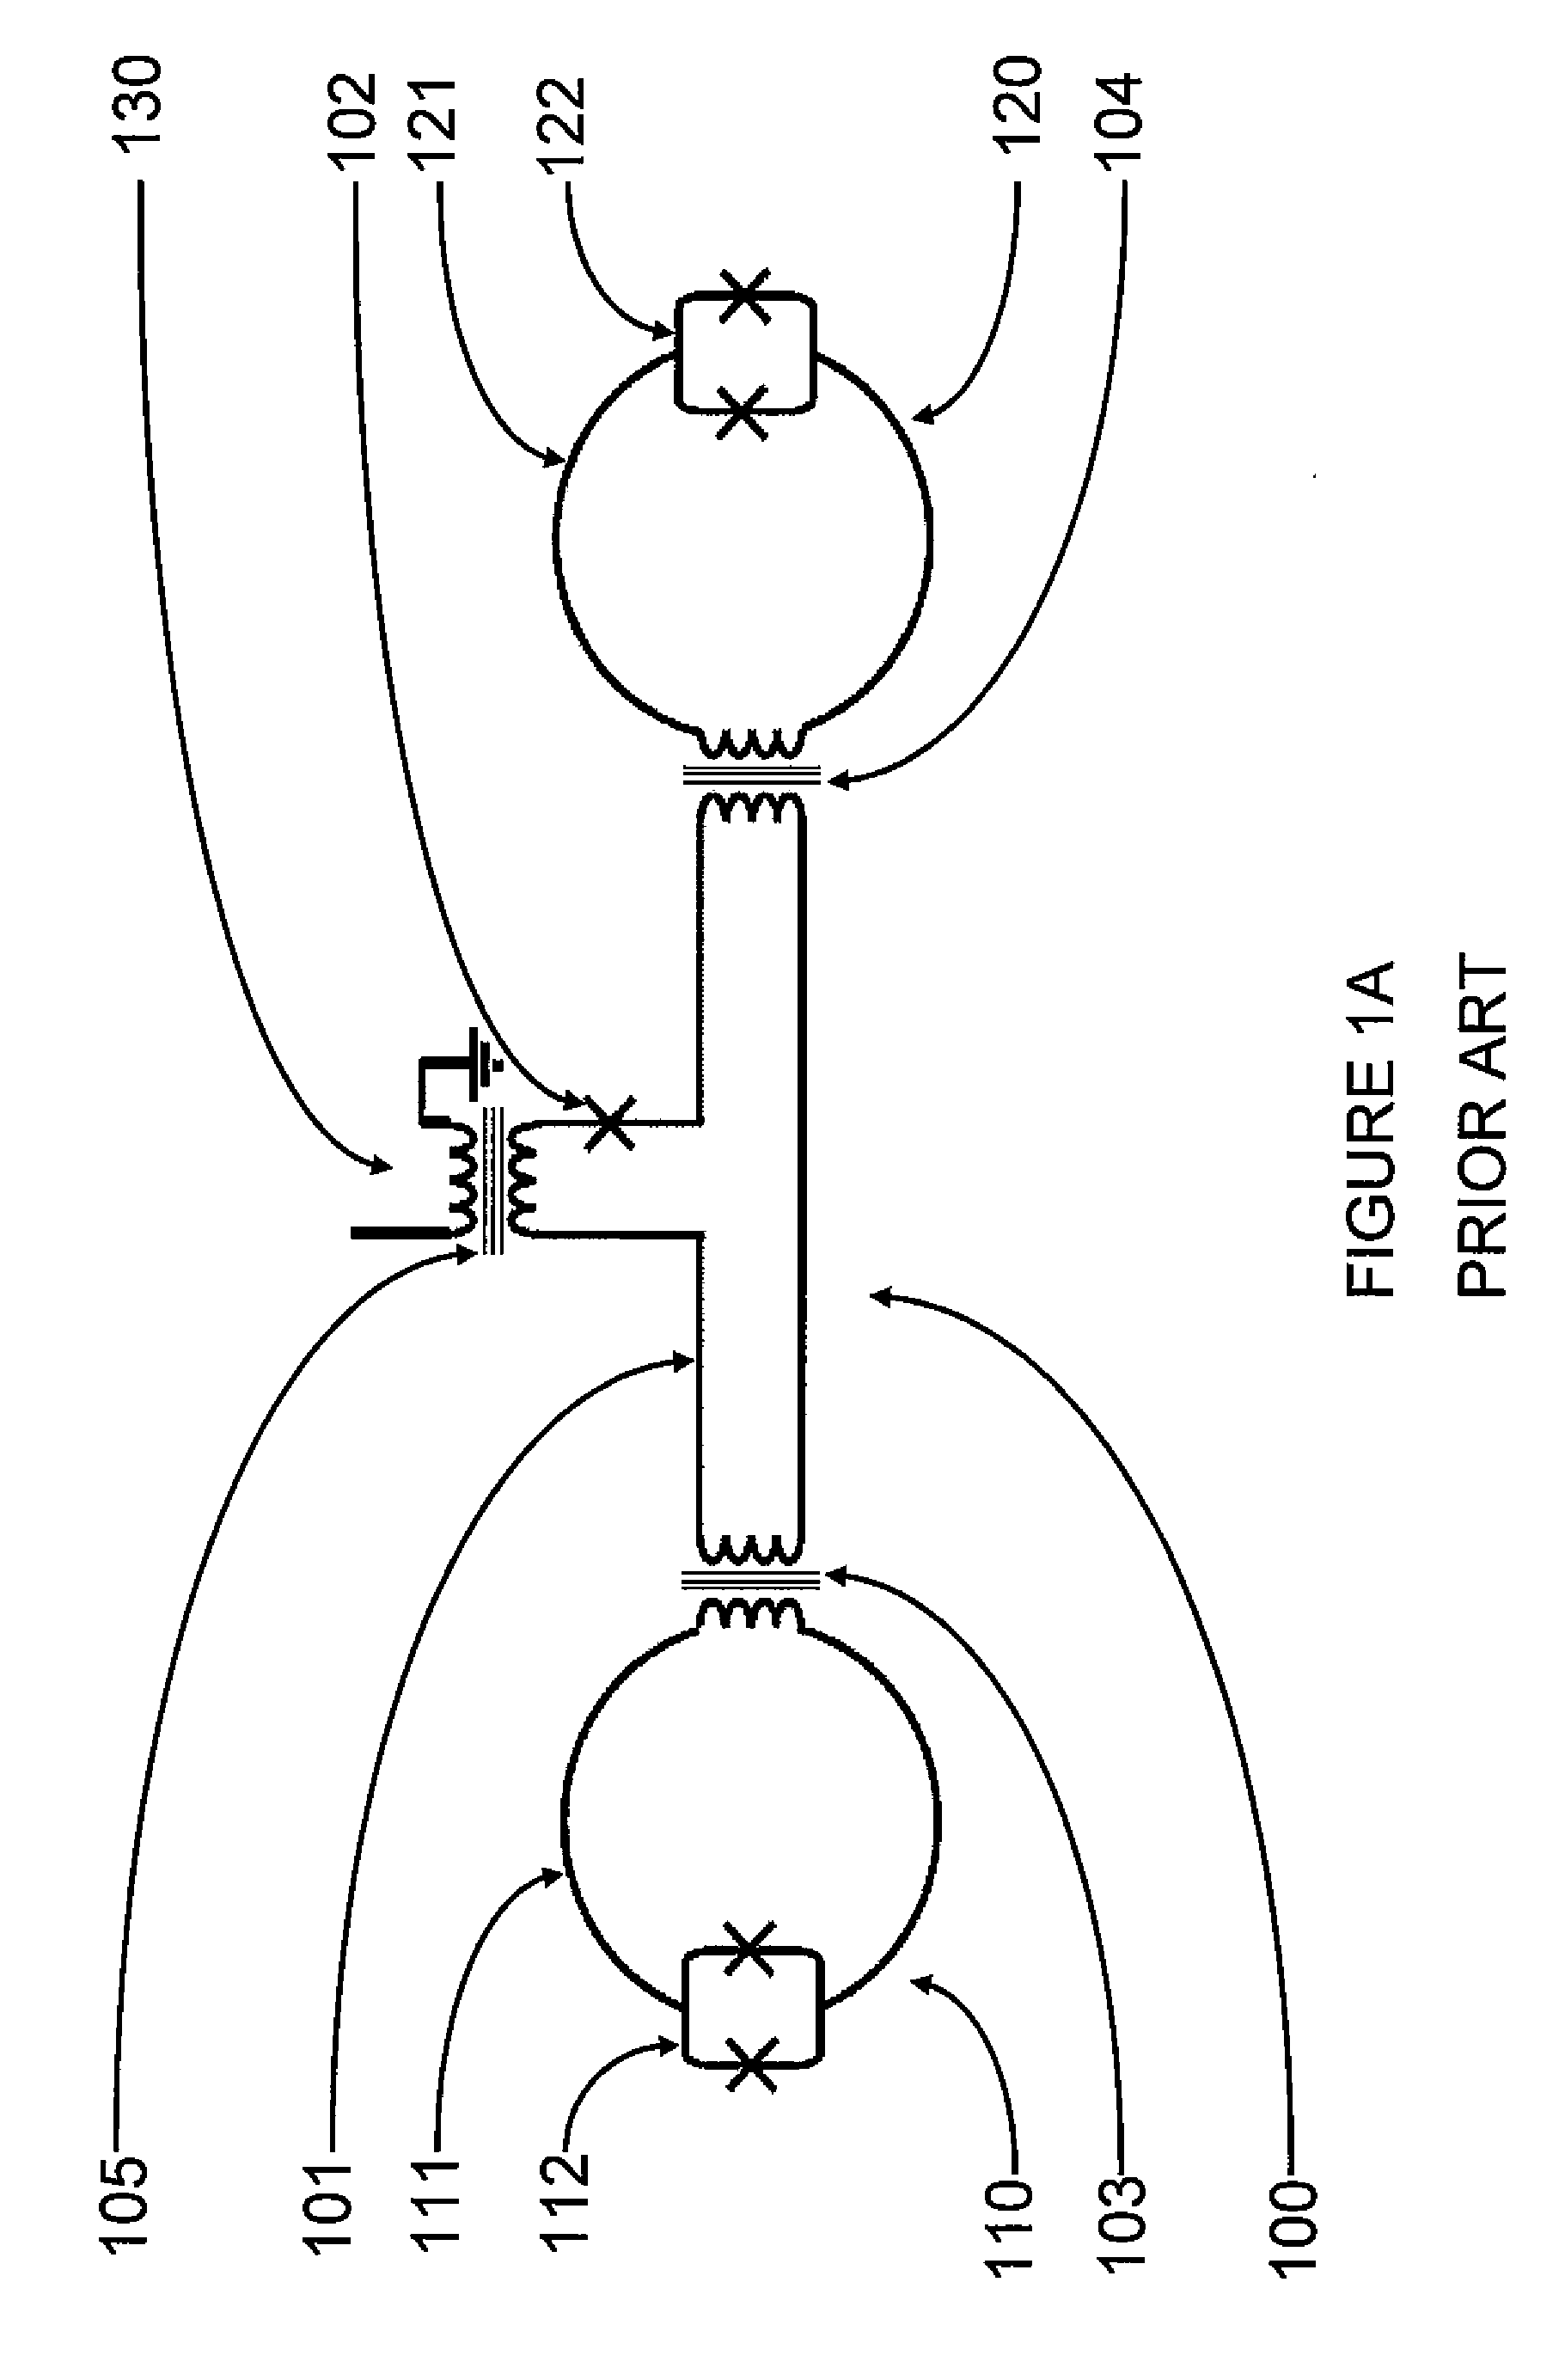 Systems, devices, and methods for controllably coupling qubits